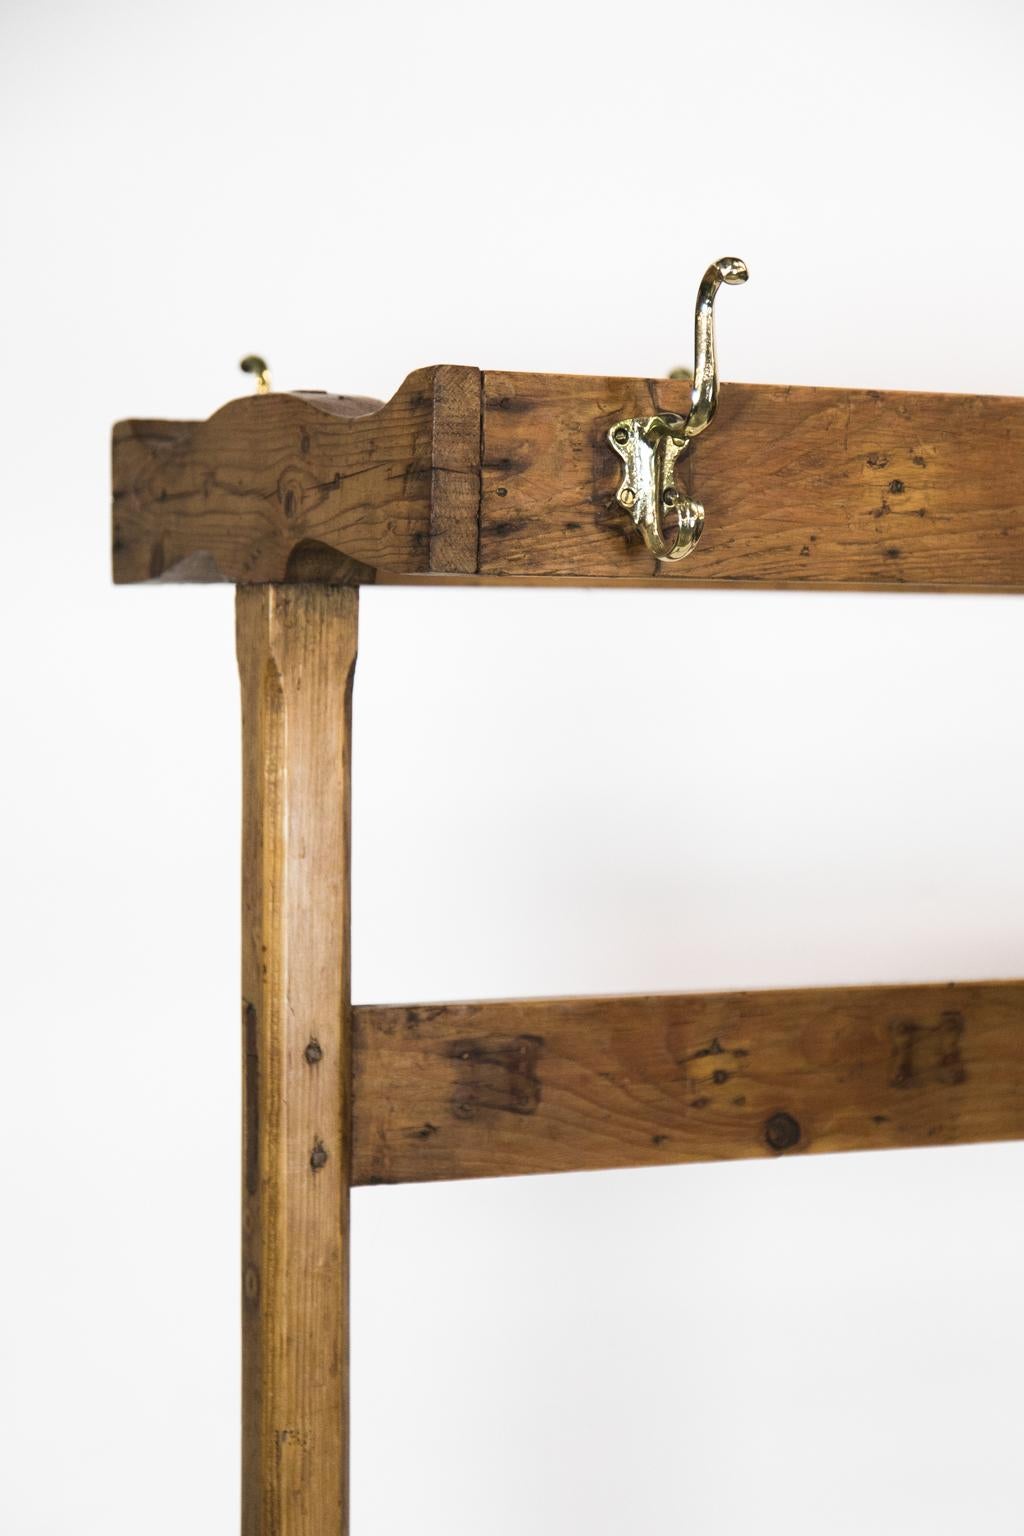 This pine rack has five heavy cast brass hooks on either side. There is double peg and exposed mortise and tenon construction. The side supports have chamfered pencil post corners. The bottom has a cross stretcher, and the legs terminate in a